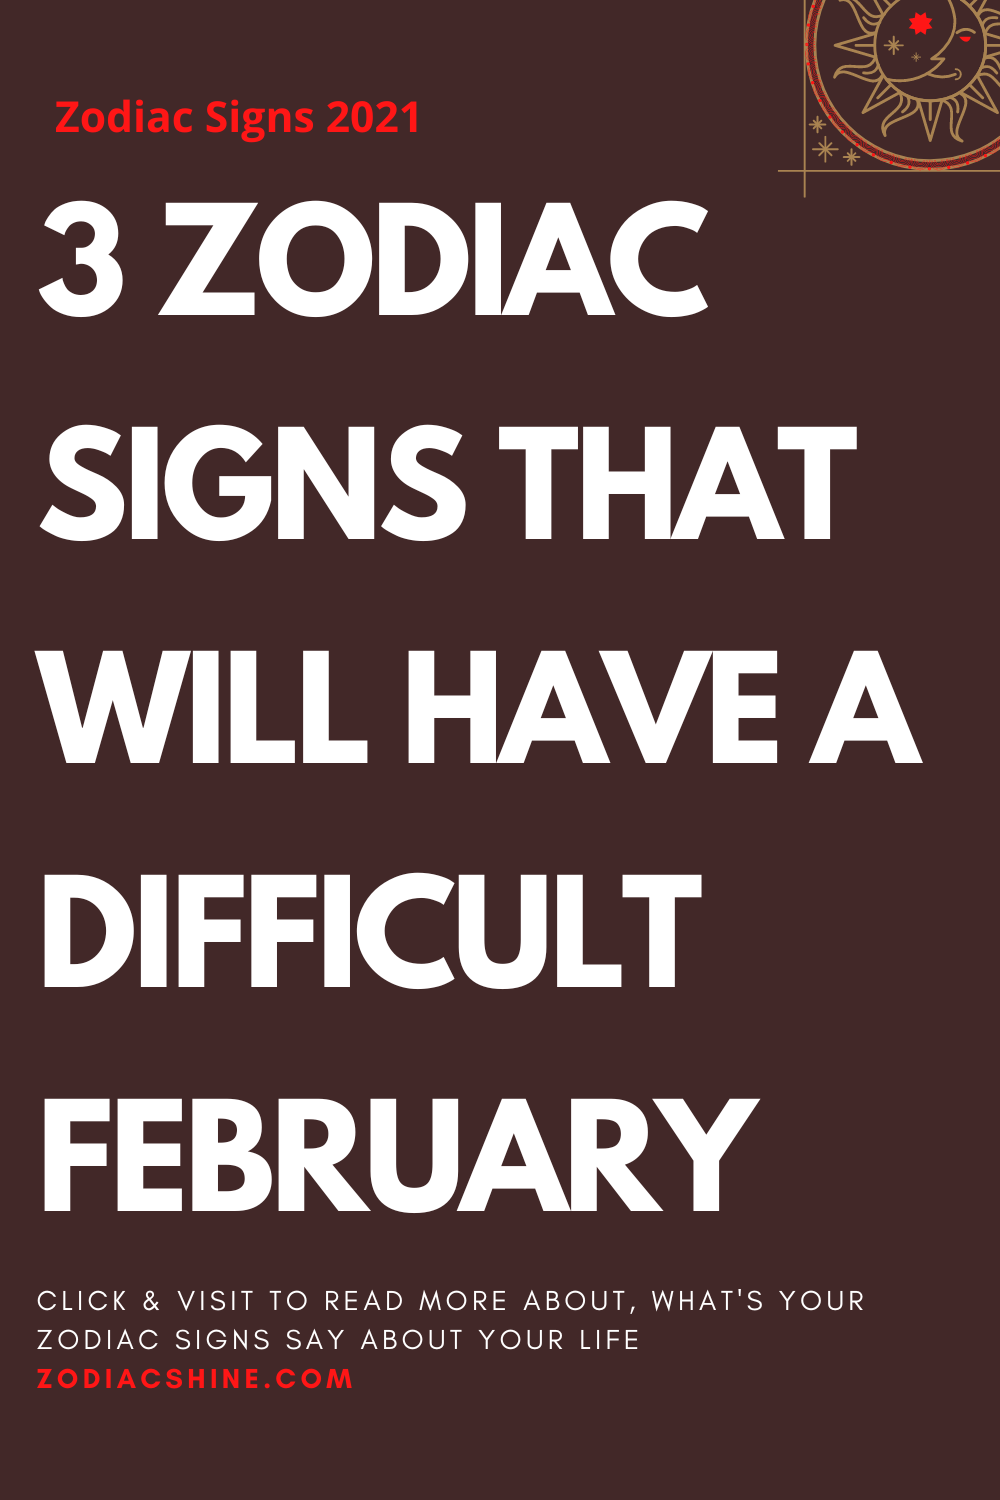 3 ZODIAC SIGNS THAT WILL HAVE A DIFFICULT FEBRUARY